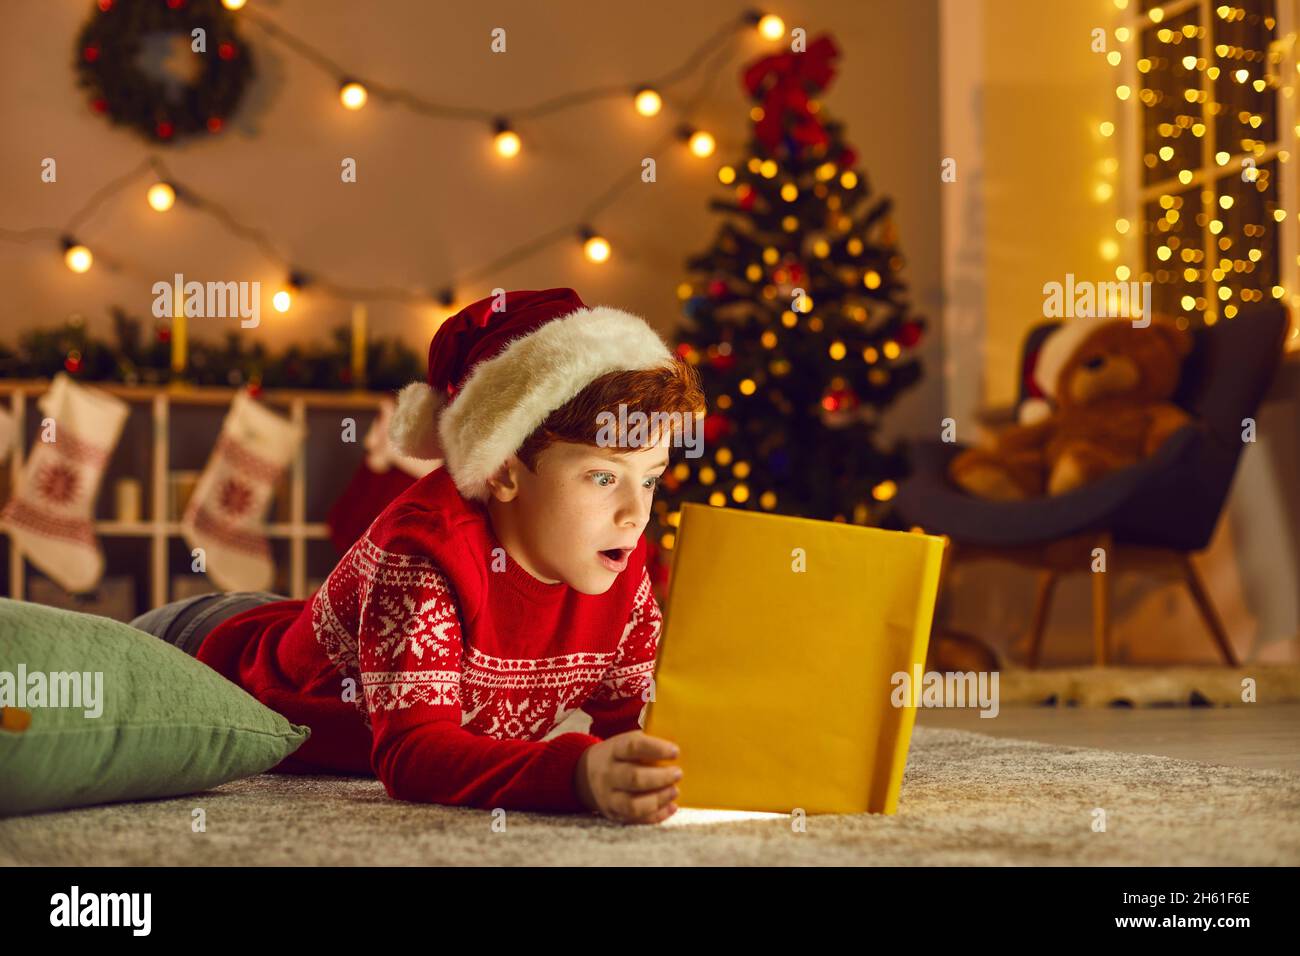 Little kid reading a book of wonderful stories and fairy tales on Christmas Eve at home Stock Photo